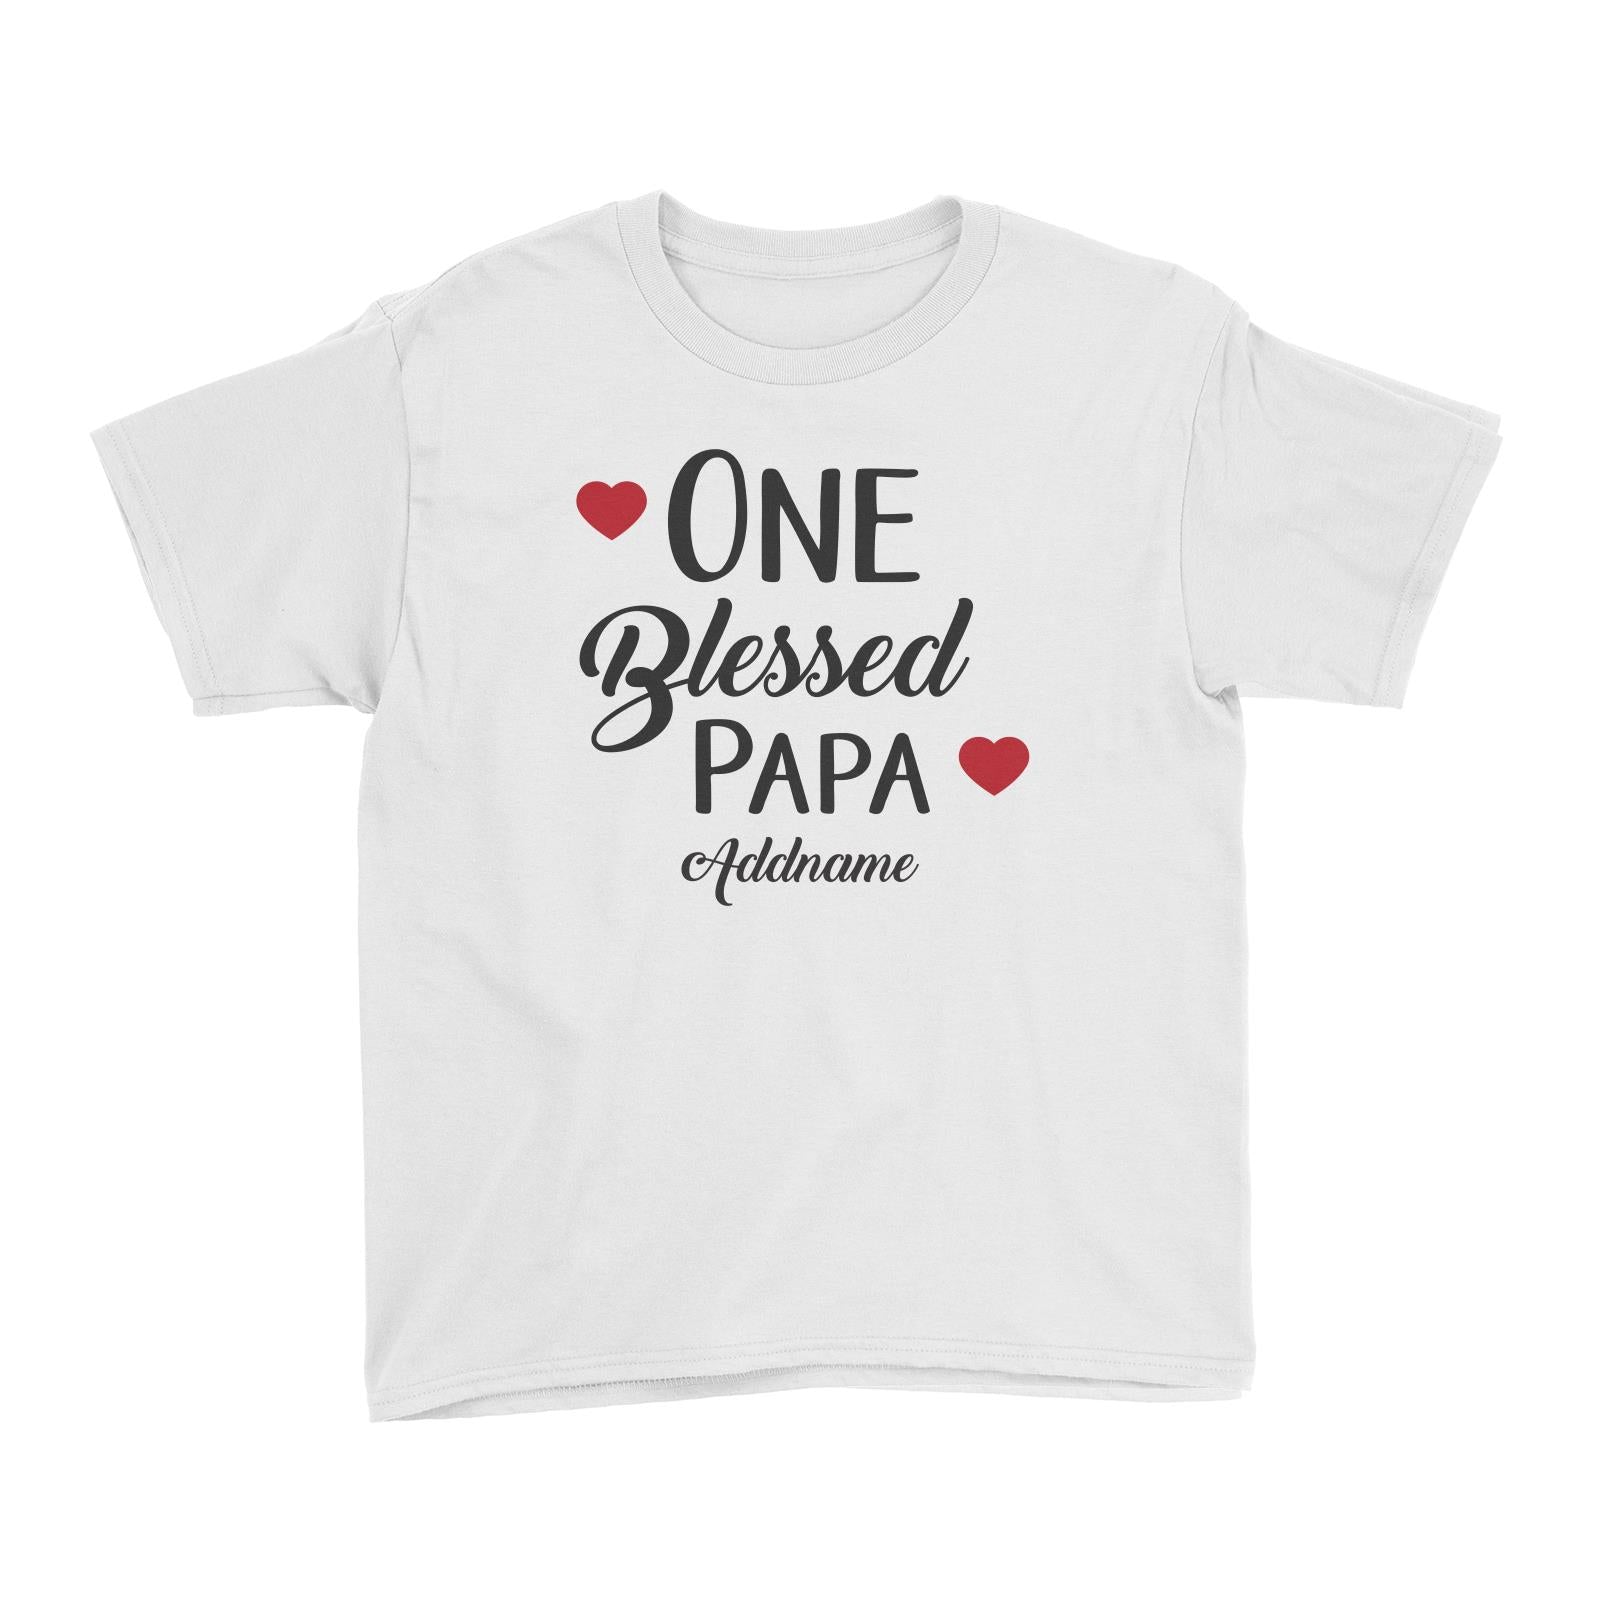 Christian Series One Blessed Papa Addname Kid's T-Shirt